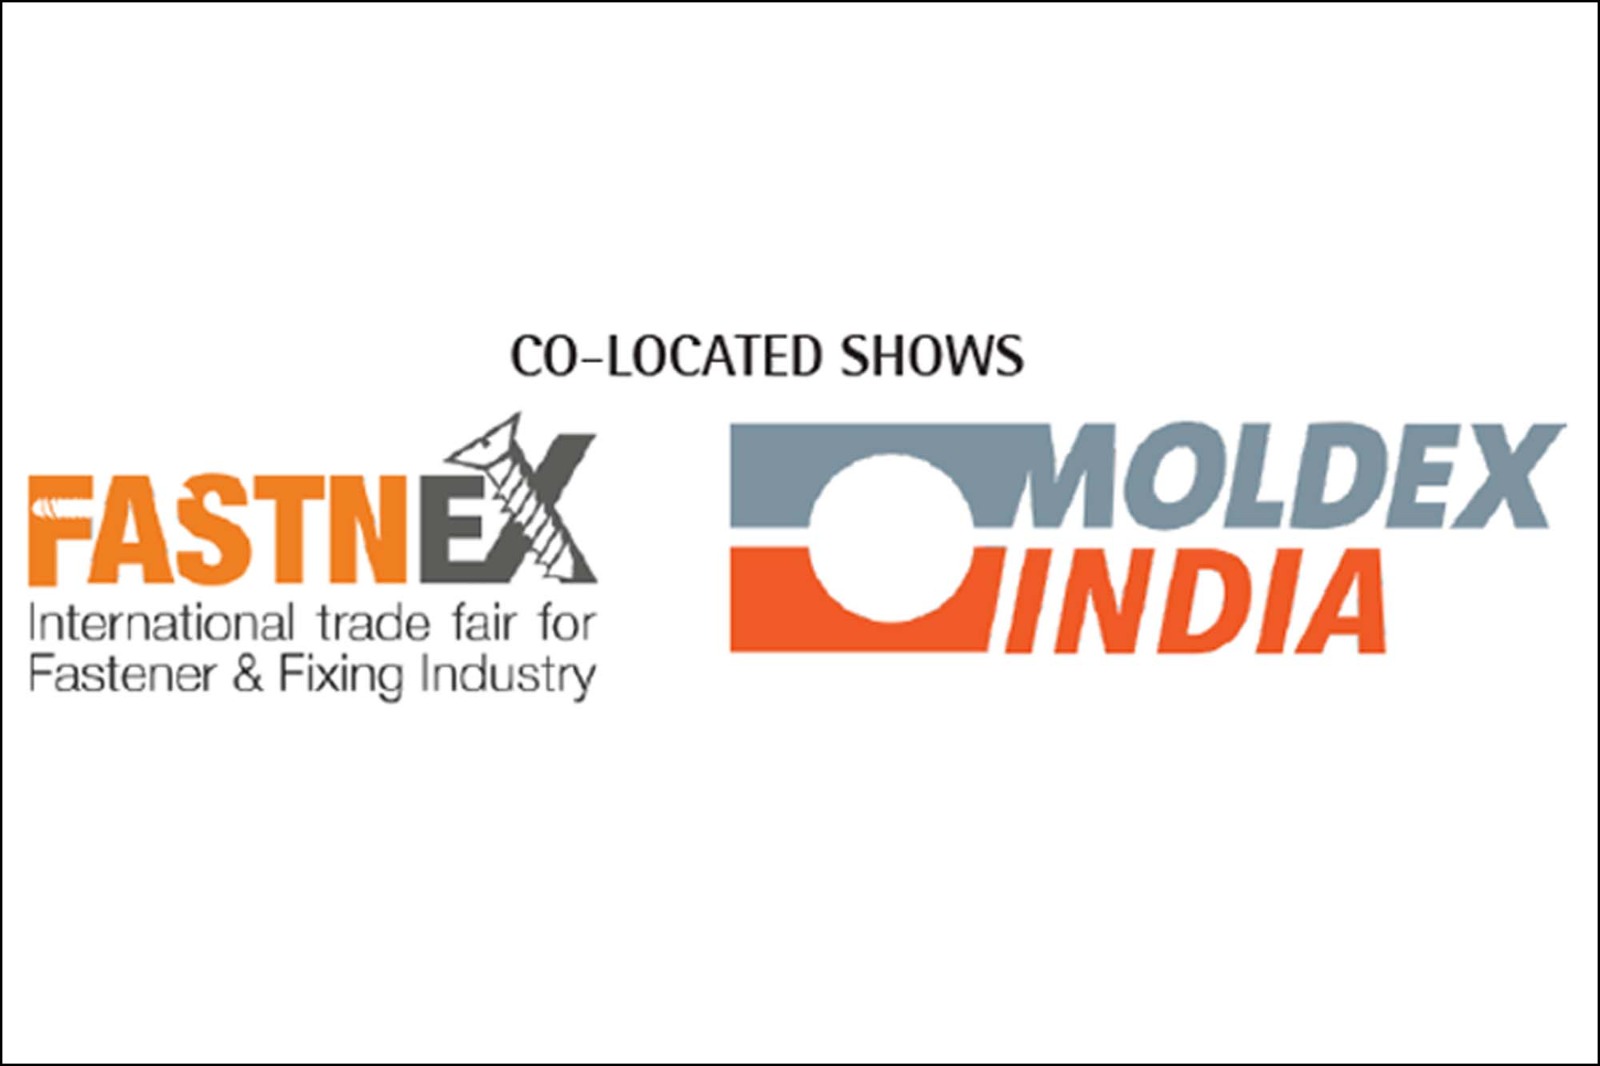 MOLDEX and FASTNEX to drive growth in the $6.5B molding and $7.5B fastener industry in India